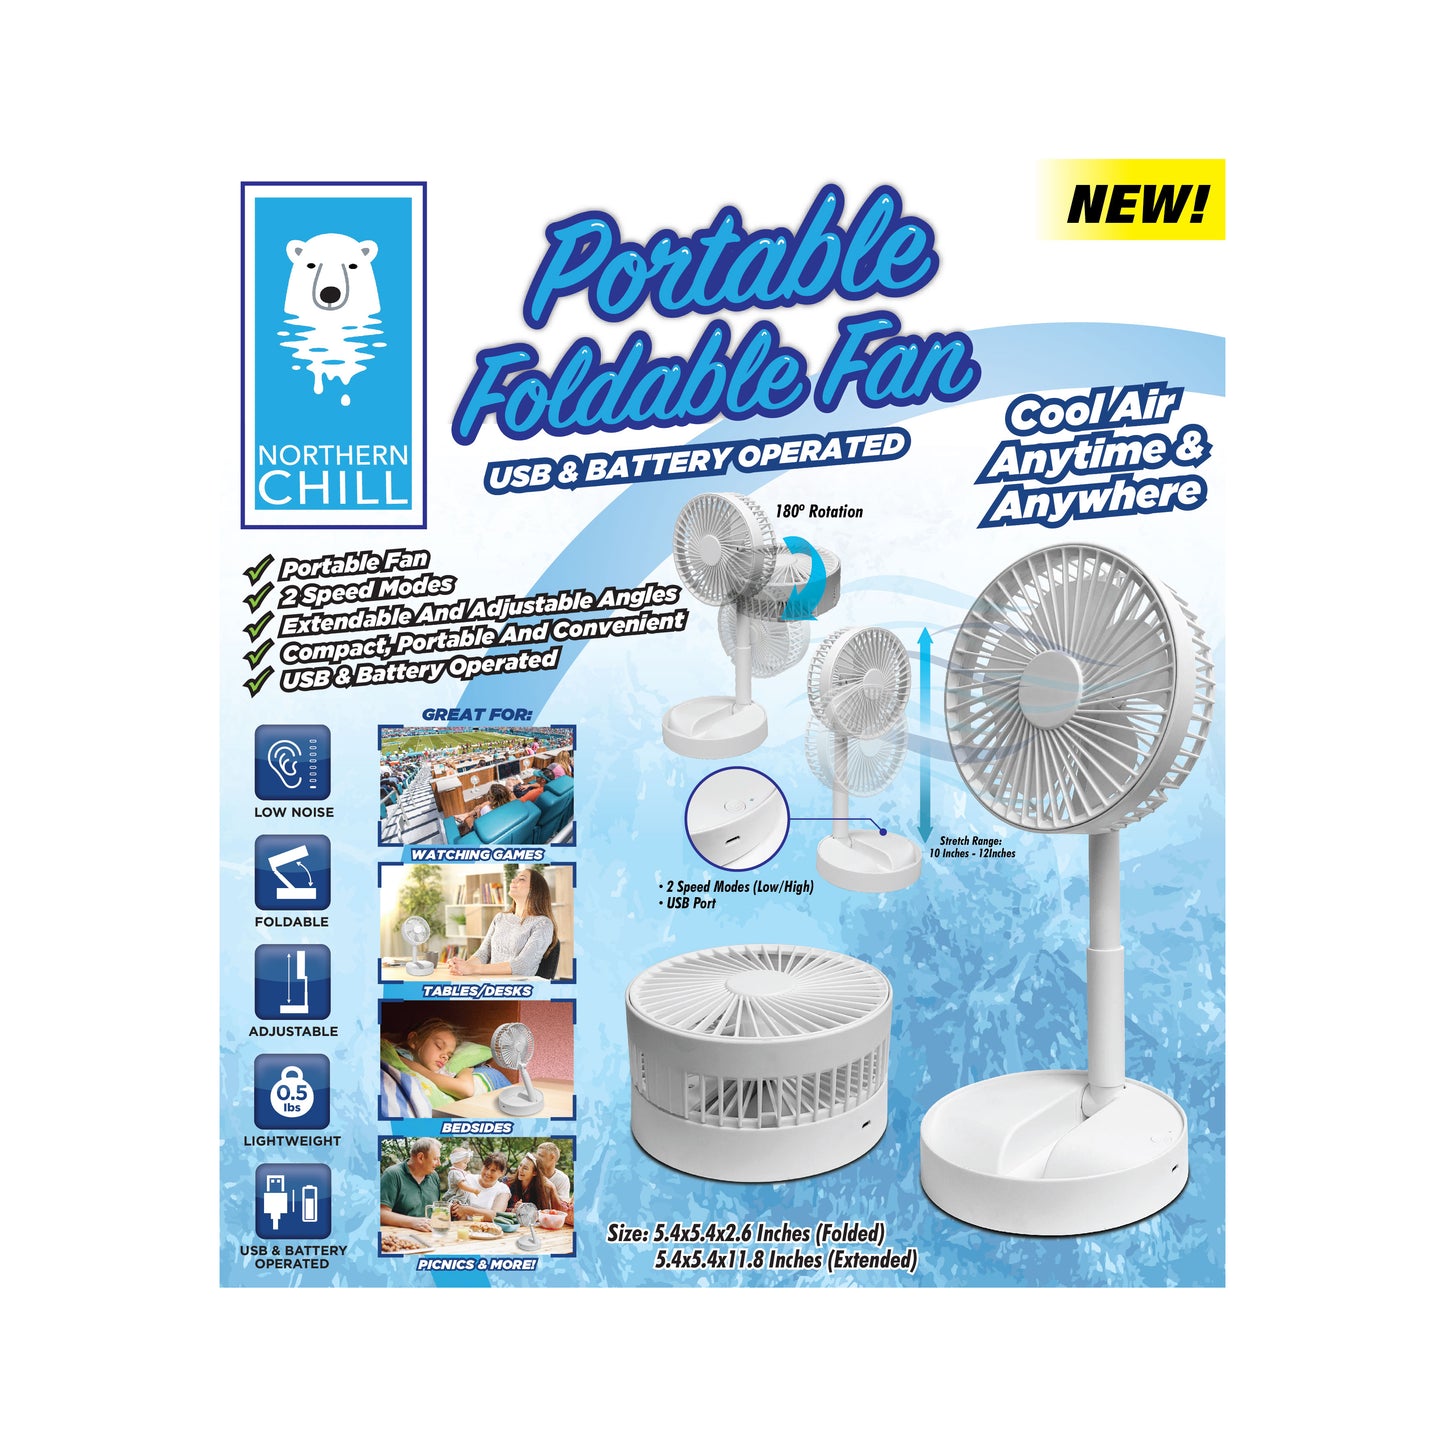 Northern Chill Portable Foldable Fan Cool Air Anytime & Anywhere - As Seen On TV